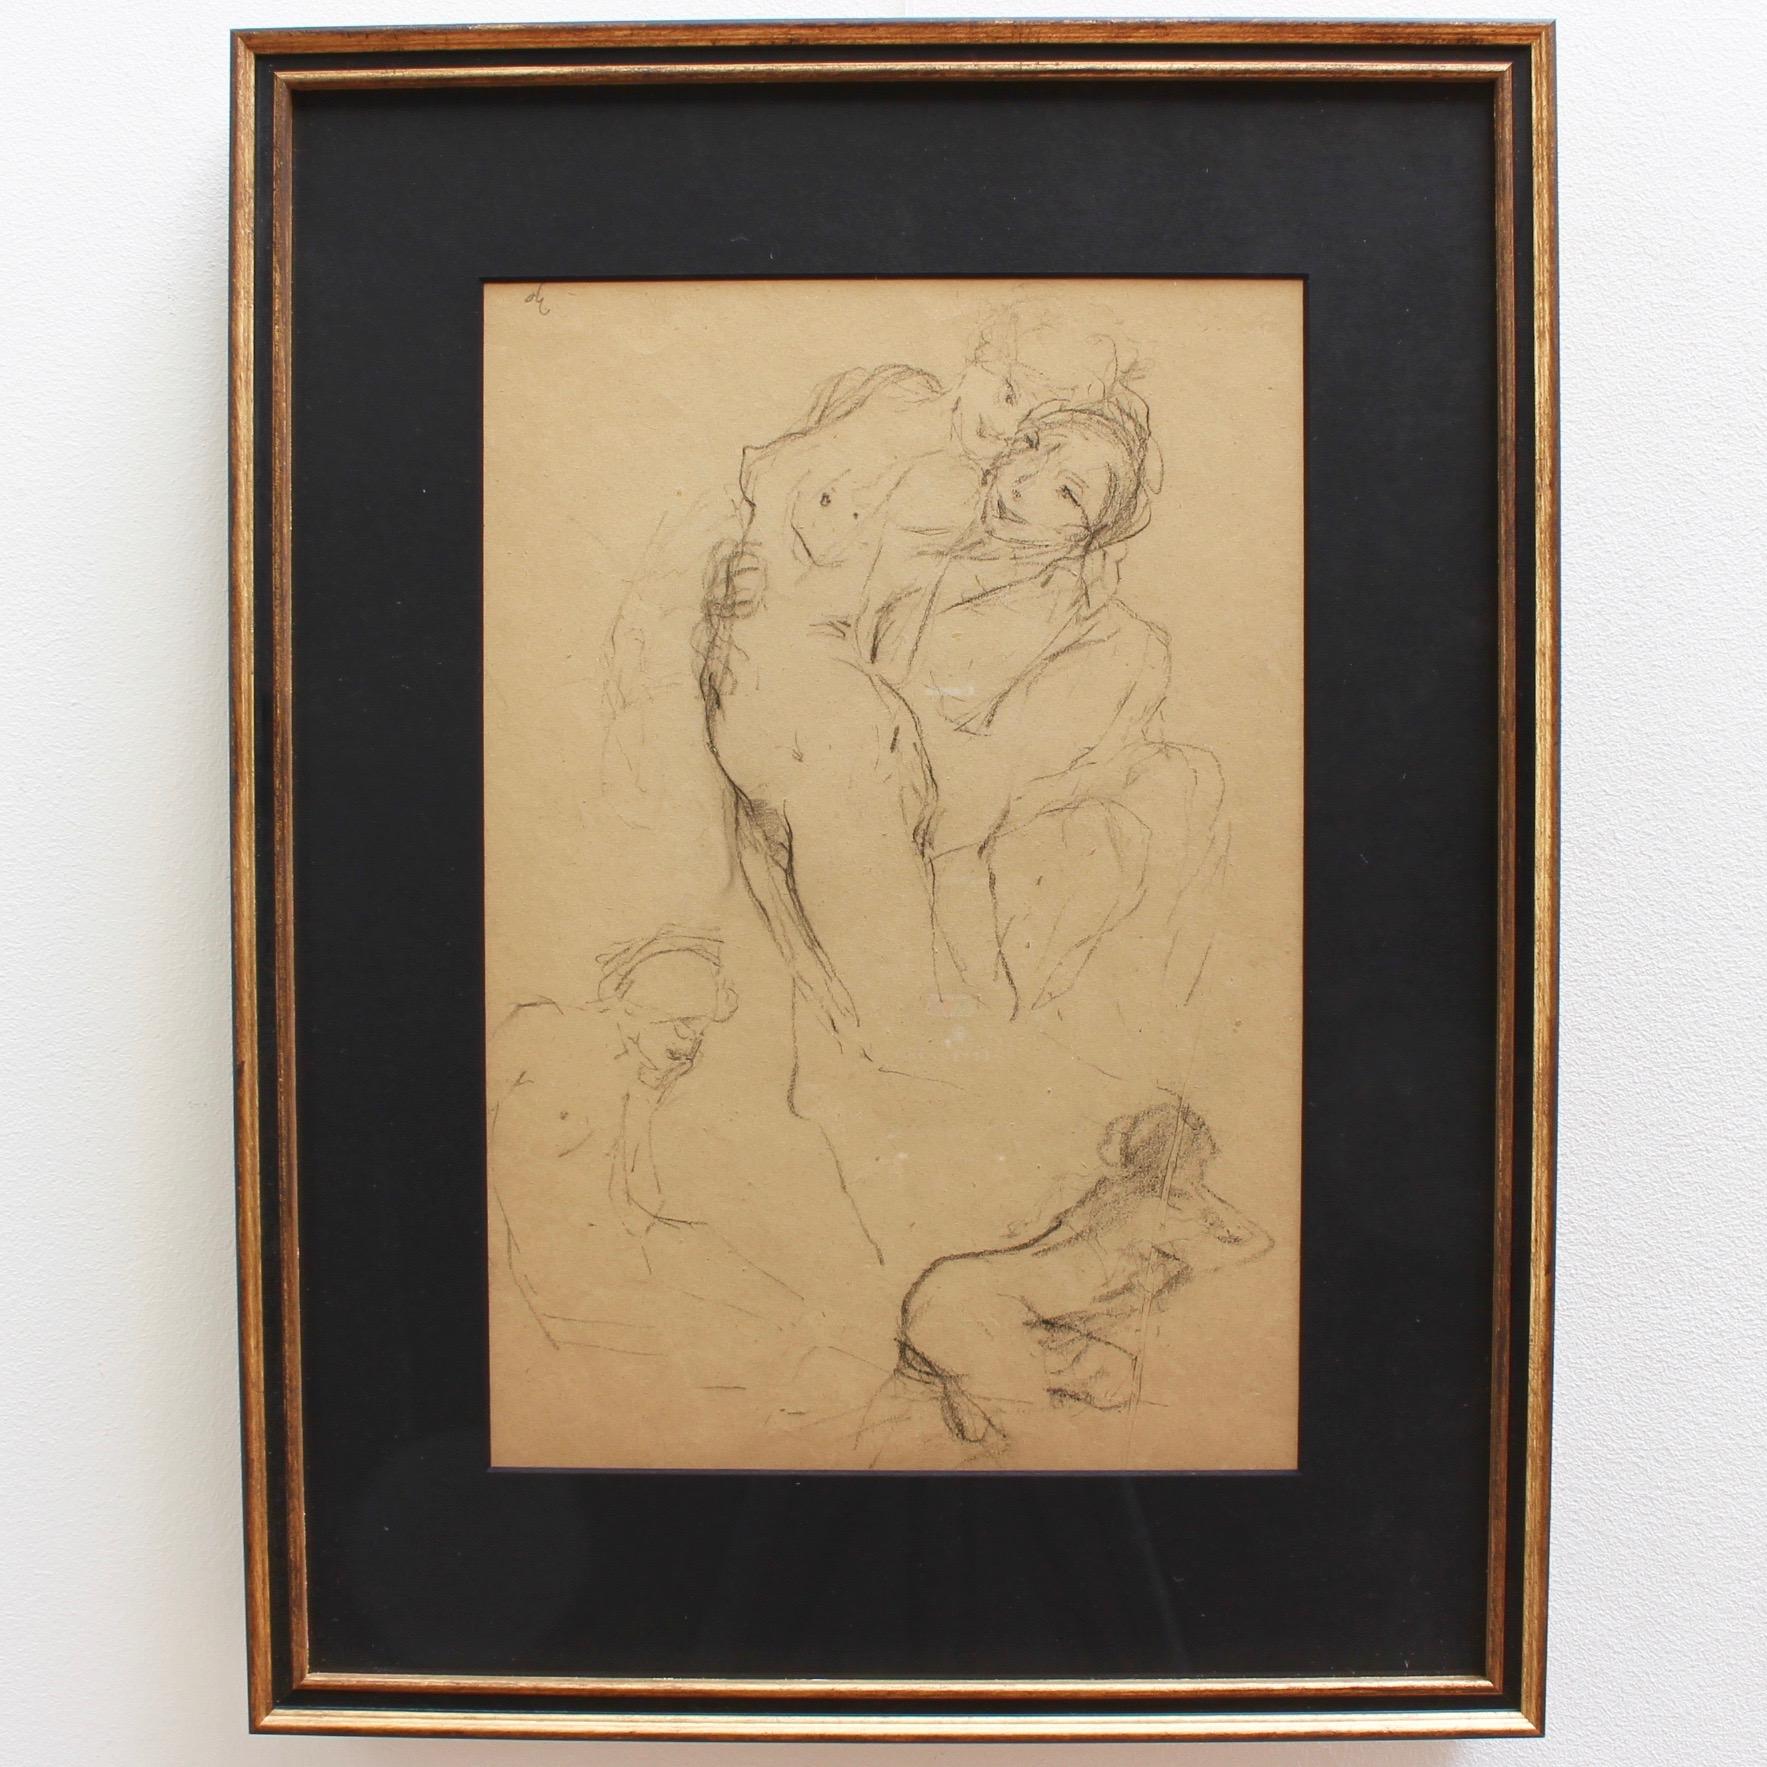 An exquisite grouping of four drawings available together as one set (circa 1920s). These sketches are studies for larger works planned by the artist and are, considering their age, very well preserved. The sketches encompass several subjects: